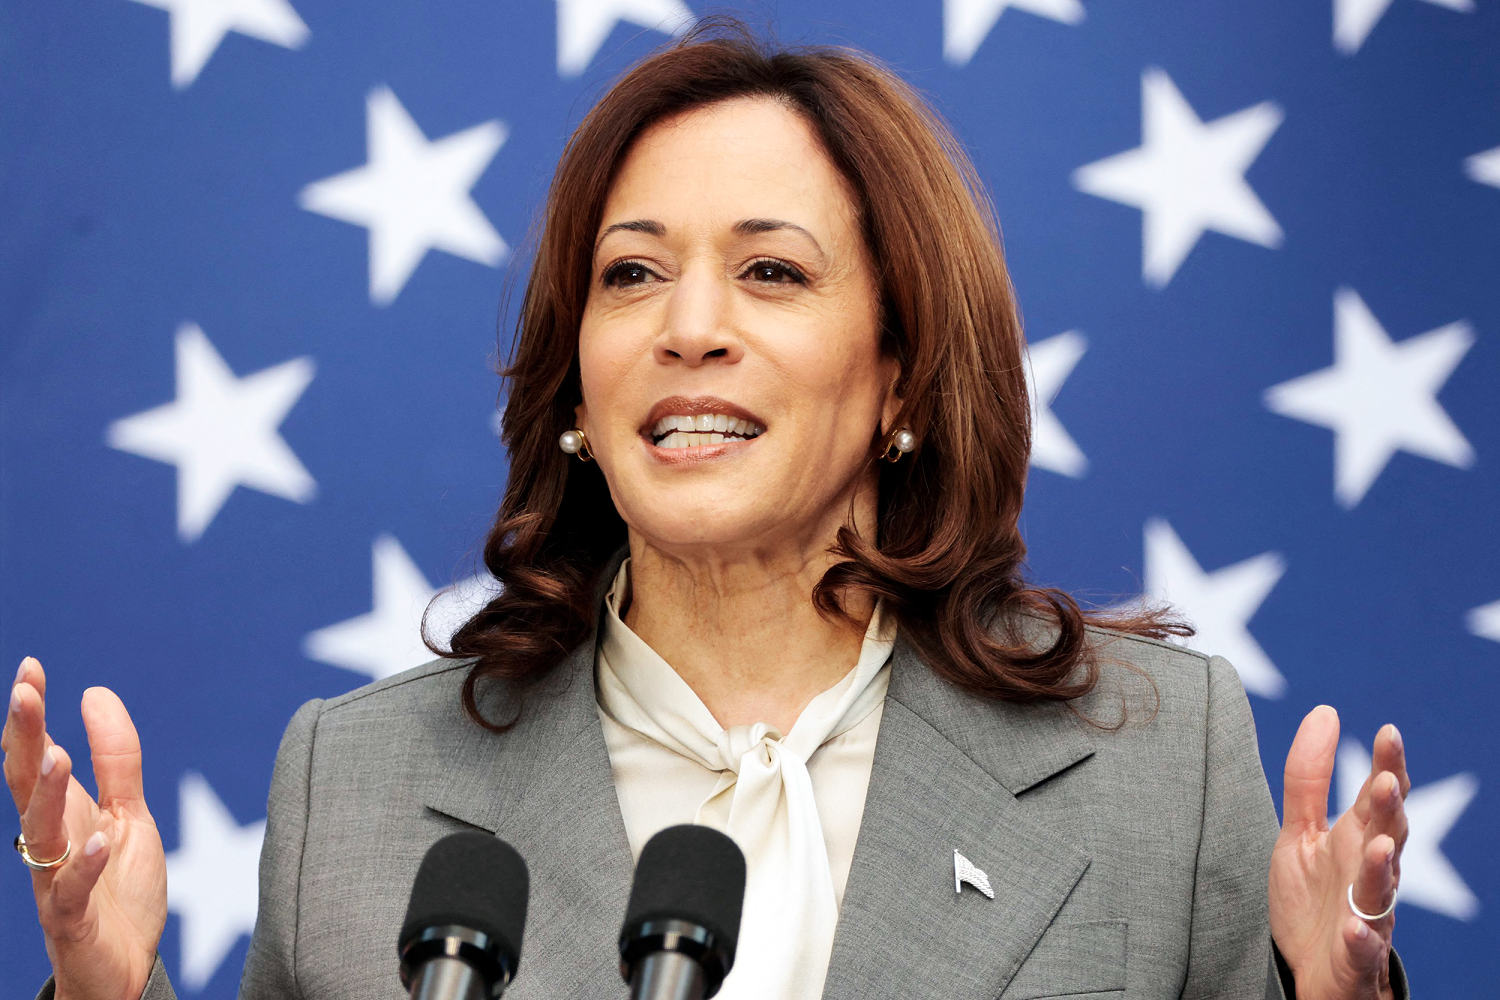 Harris says more Indian American representation is needed in government